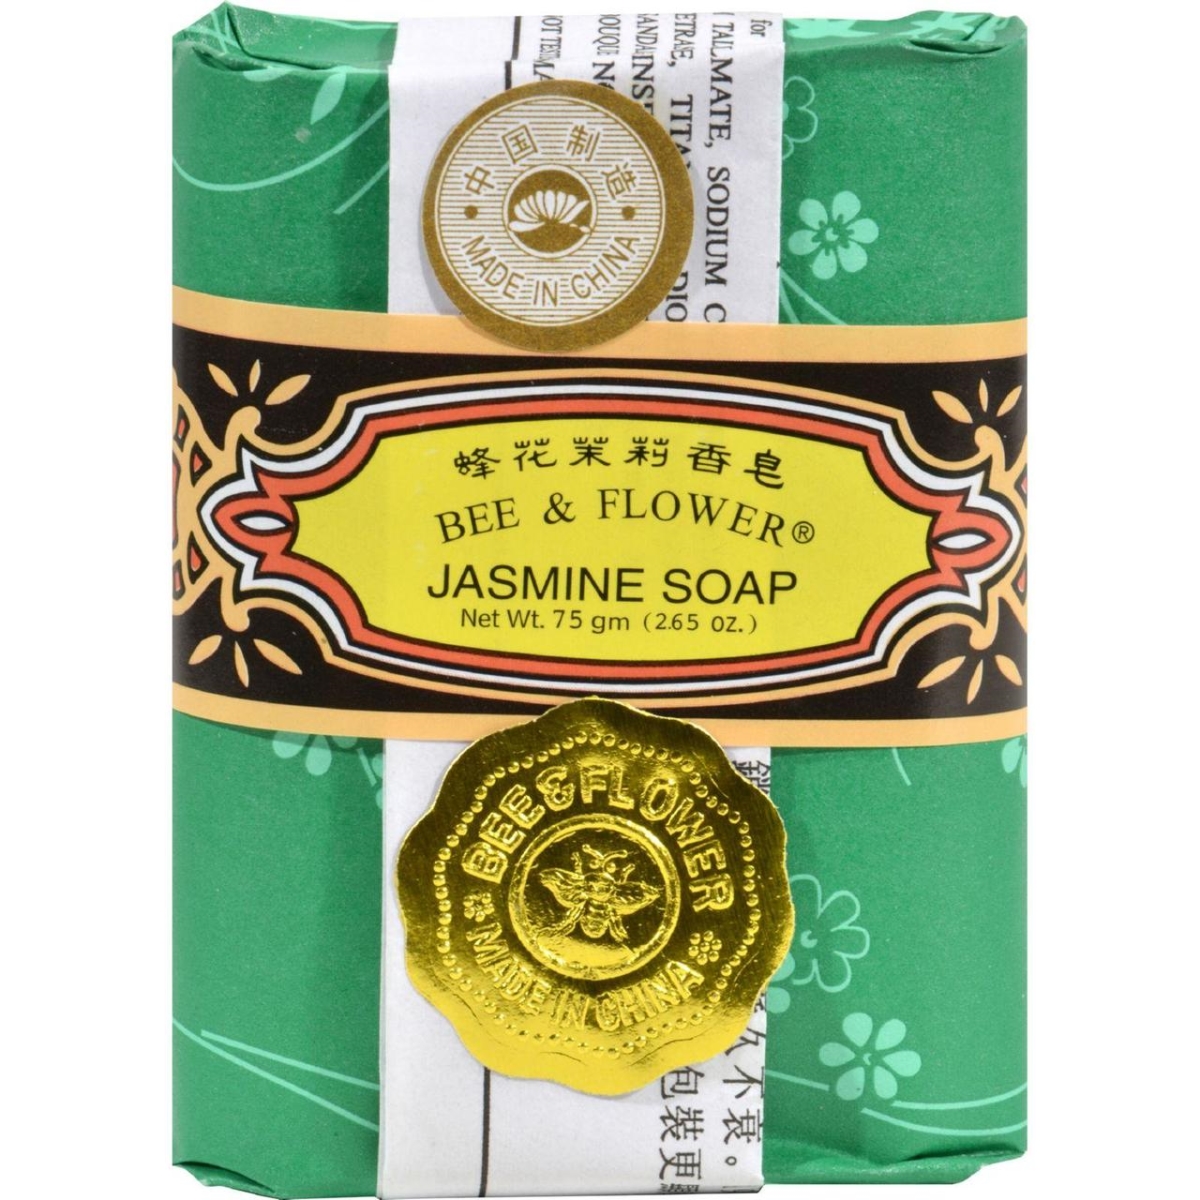 Bee And Flower Hg0324400 2.65 Oz Jasmine Soap - Case Of 12